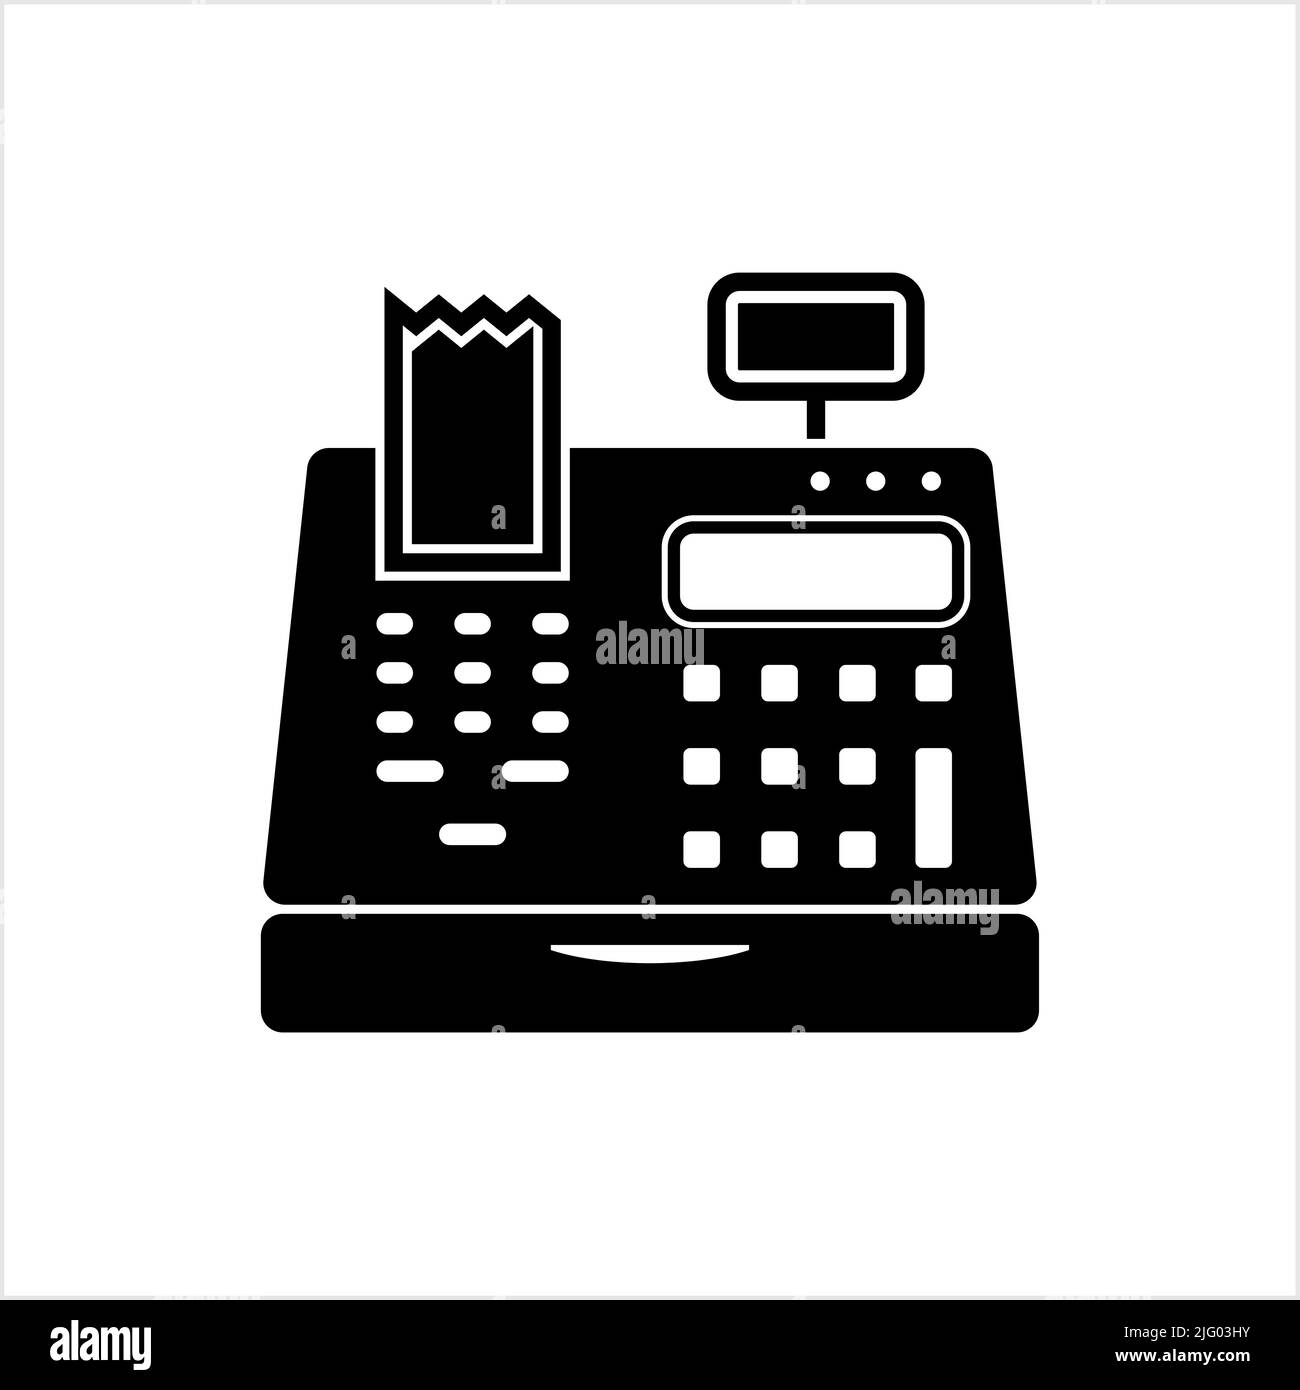 Cash Register Icon, Point Of Sale Electronic Device For Registering And Calculating Transactions Vector Art Illustration Stock Vector